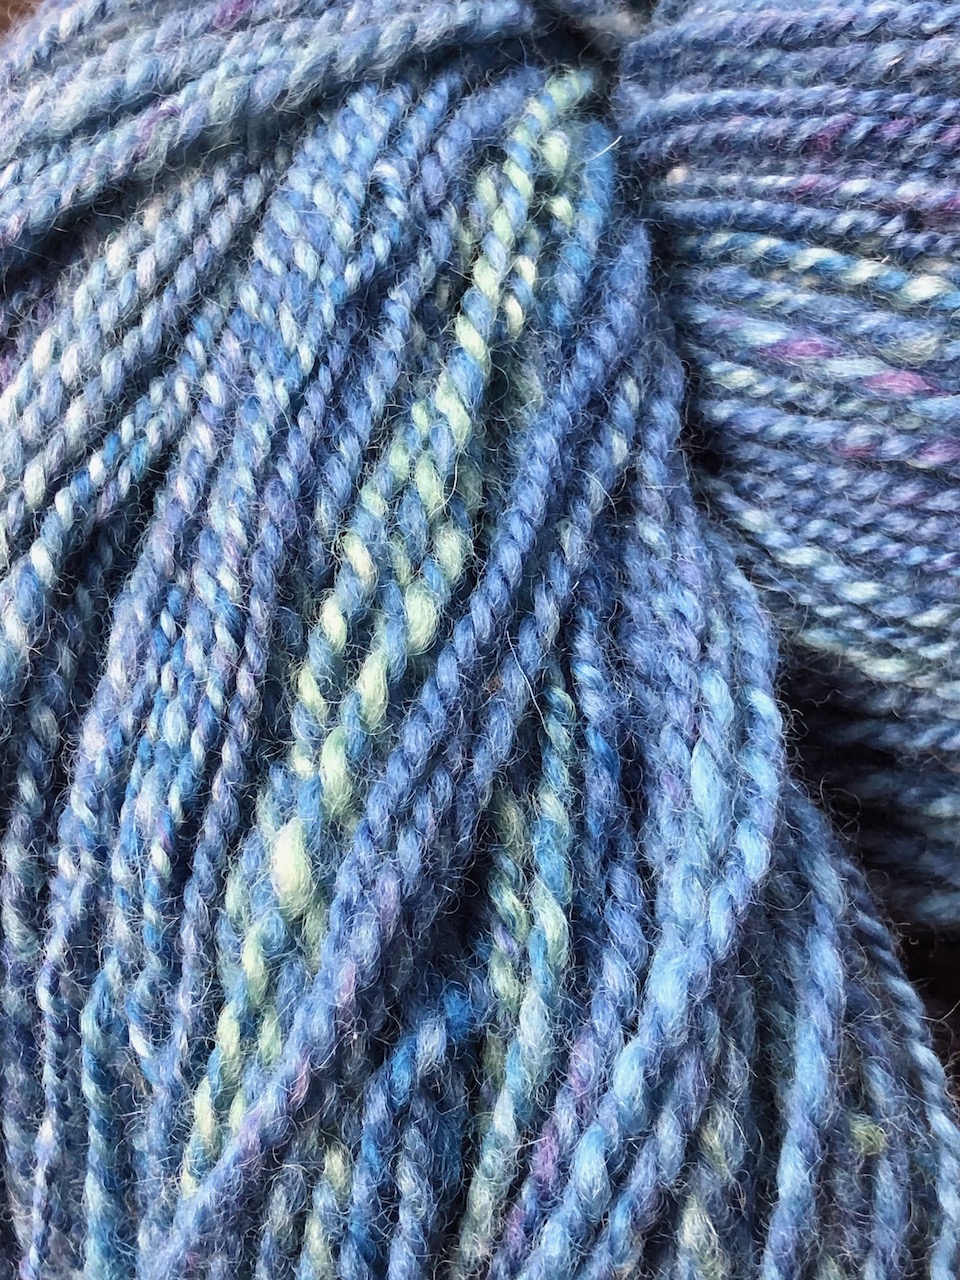 Spun yarn (Blue-faced Leicester/Cormo cross, hand-dyed)